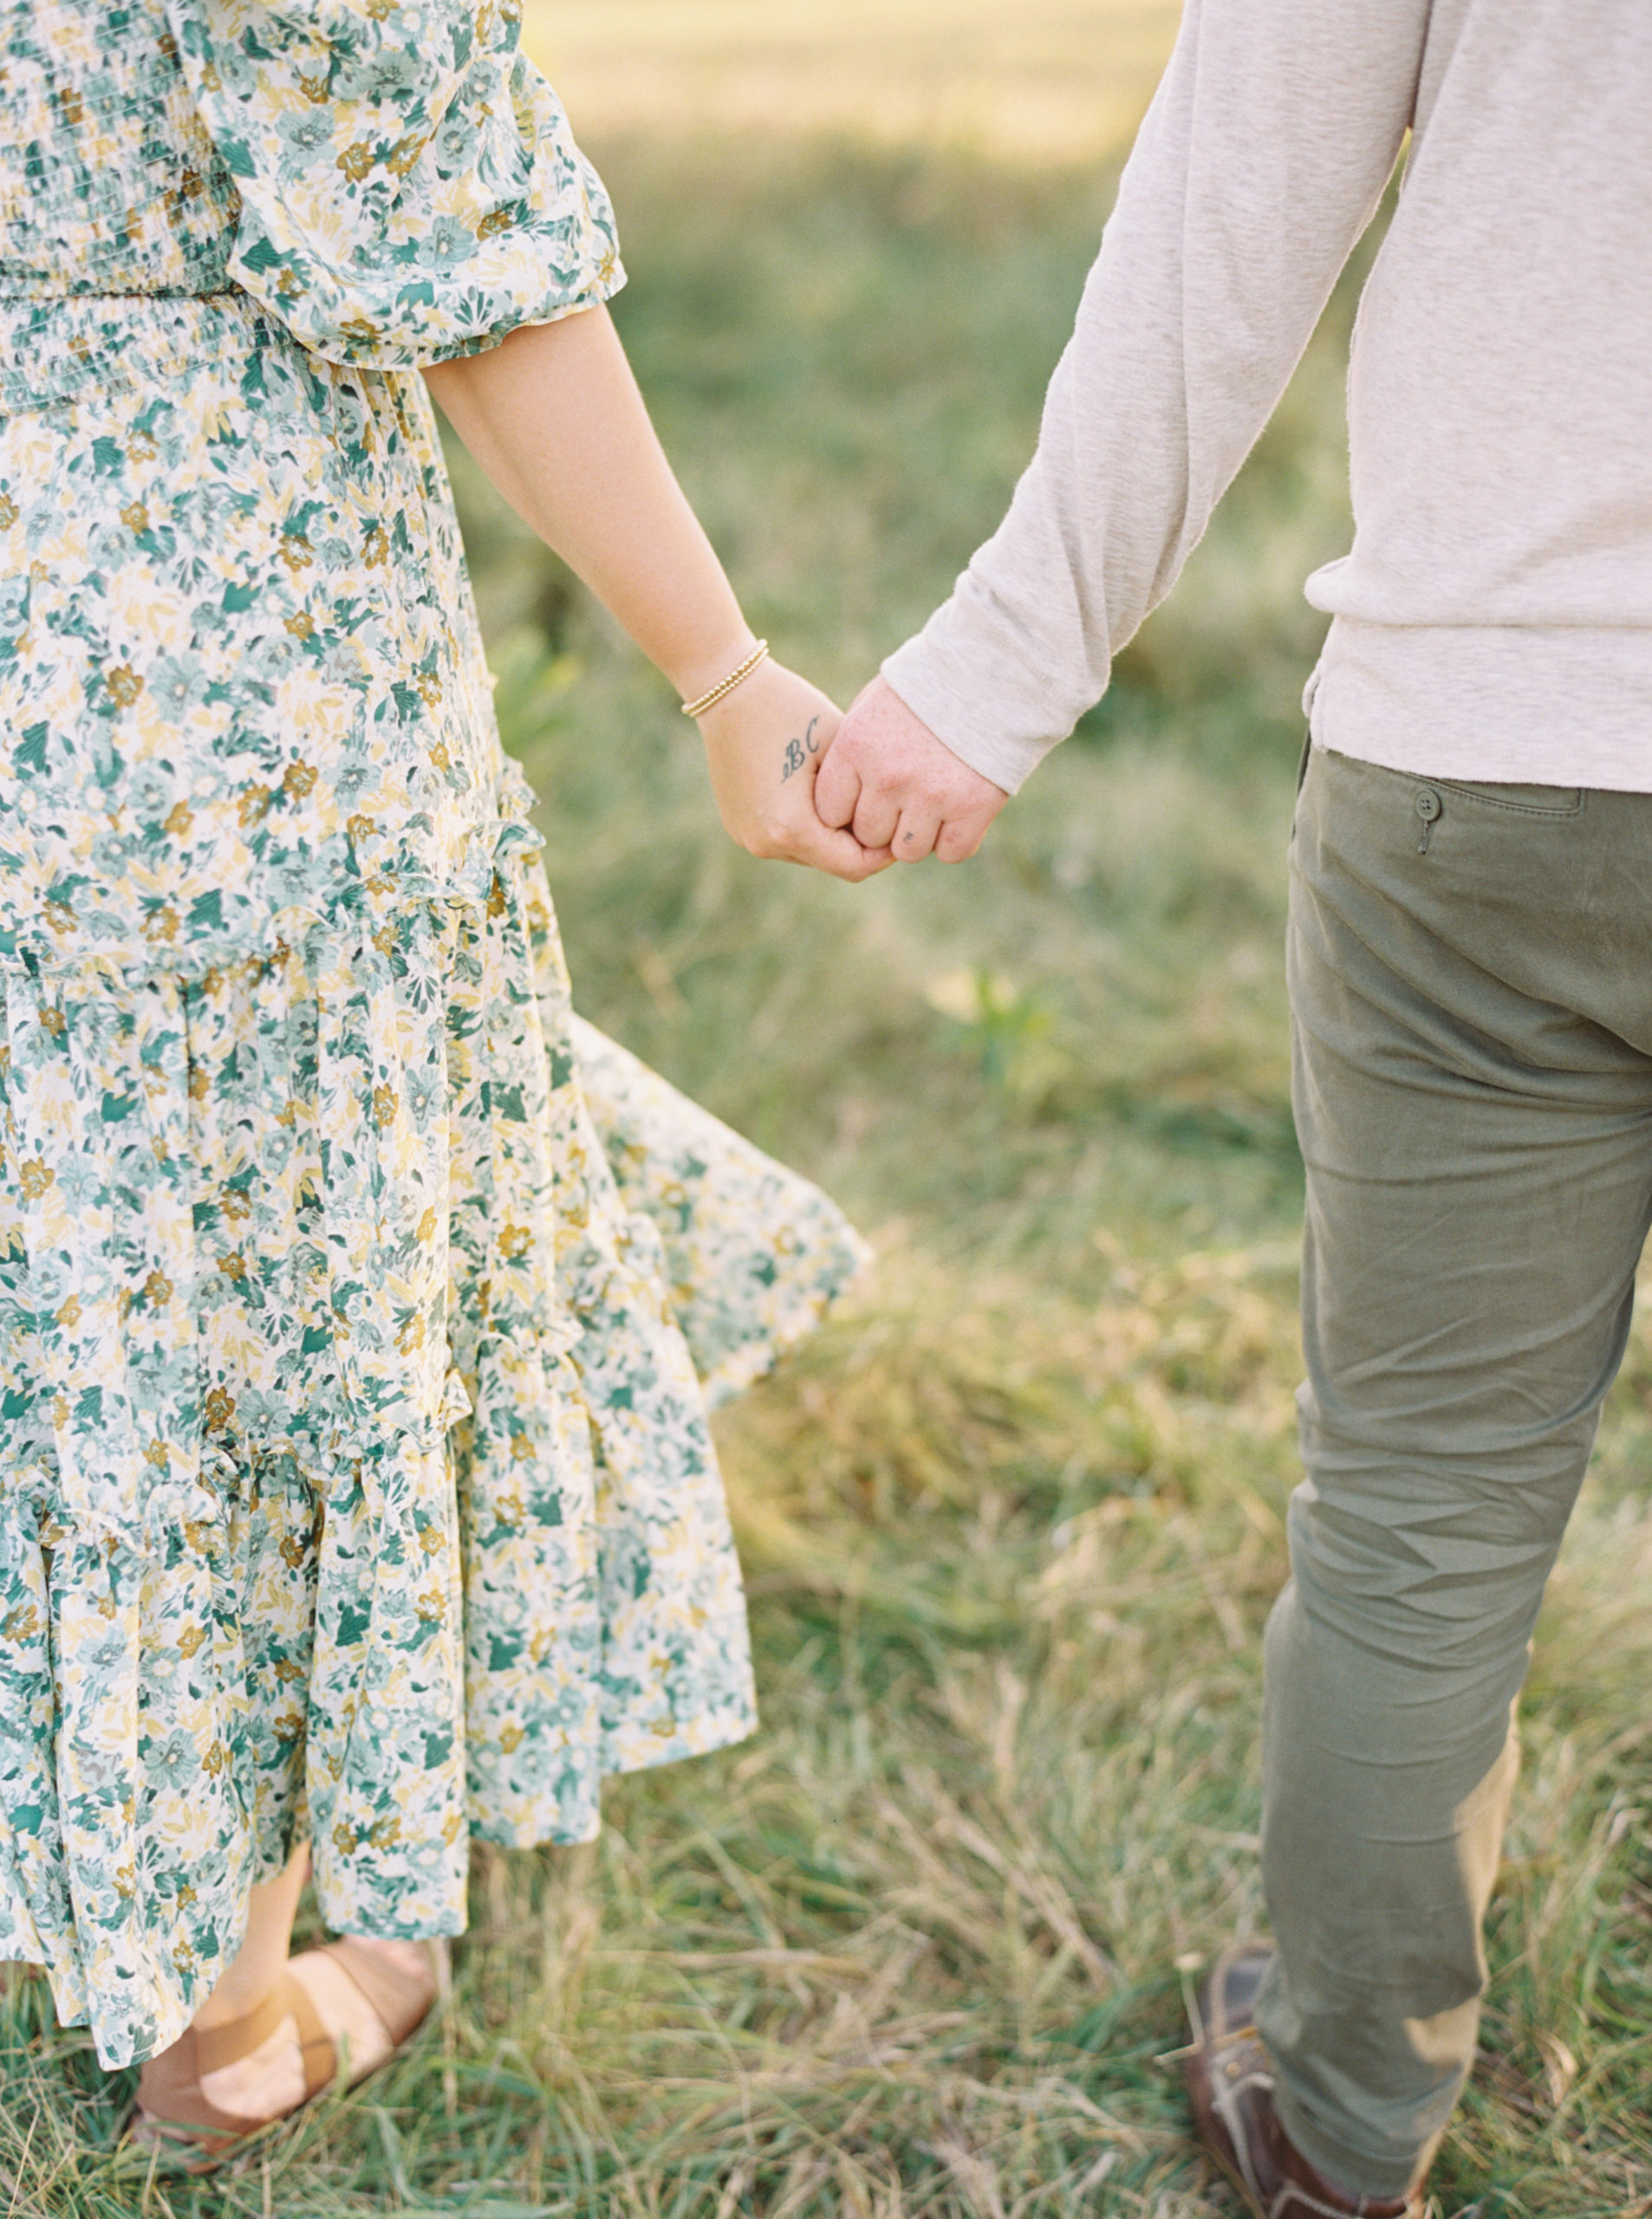 Holding hands in a grassy green field setting in Shorewood in the summer